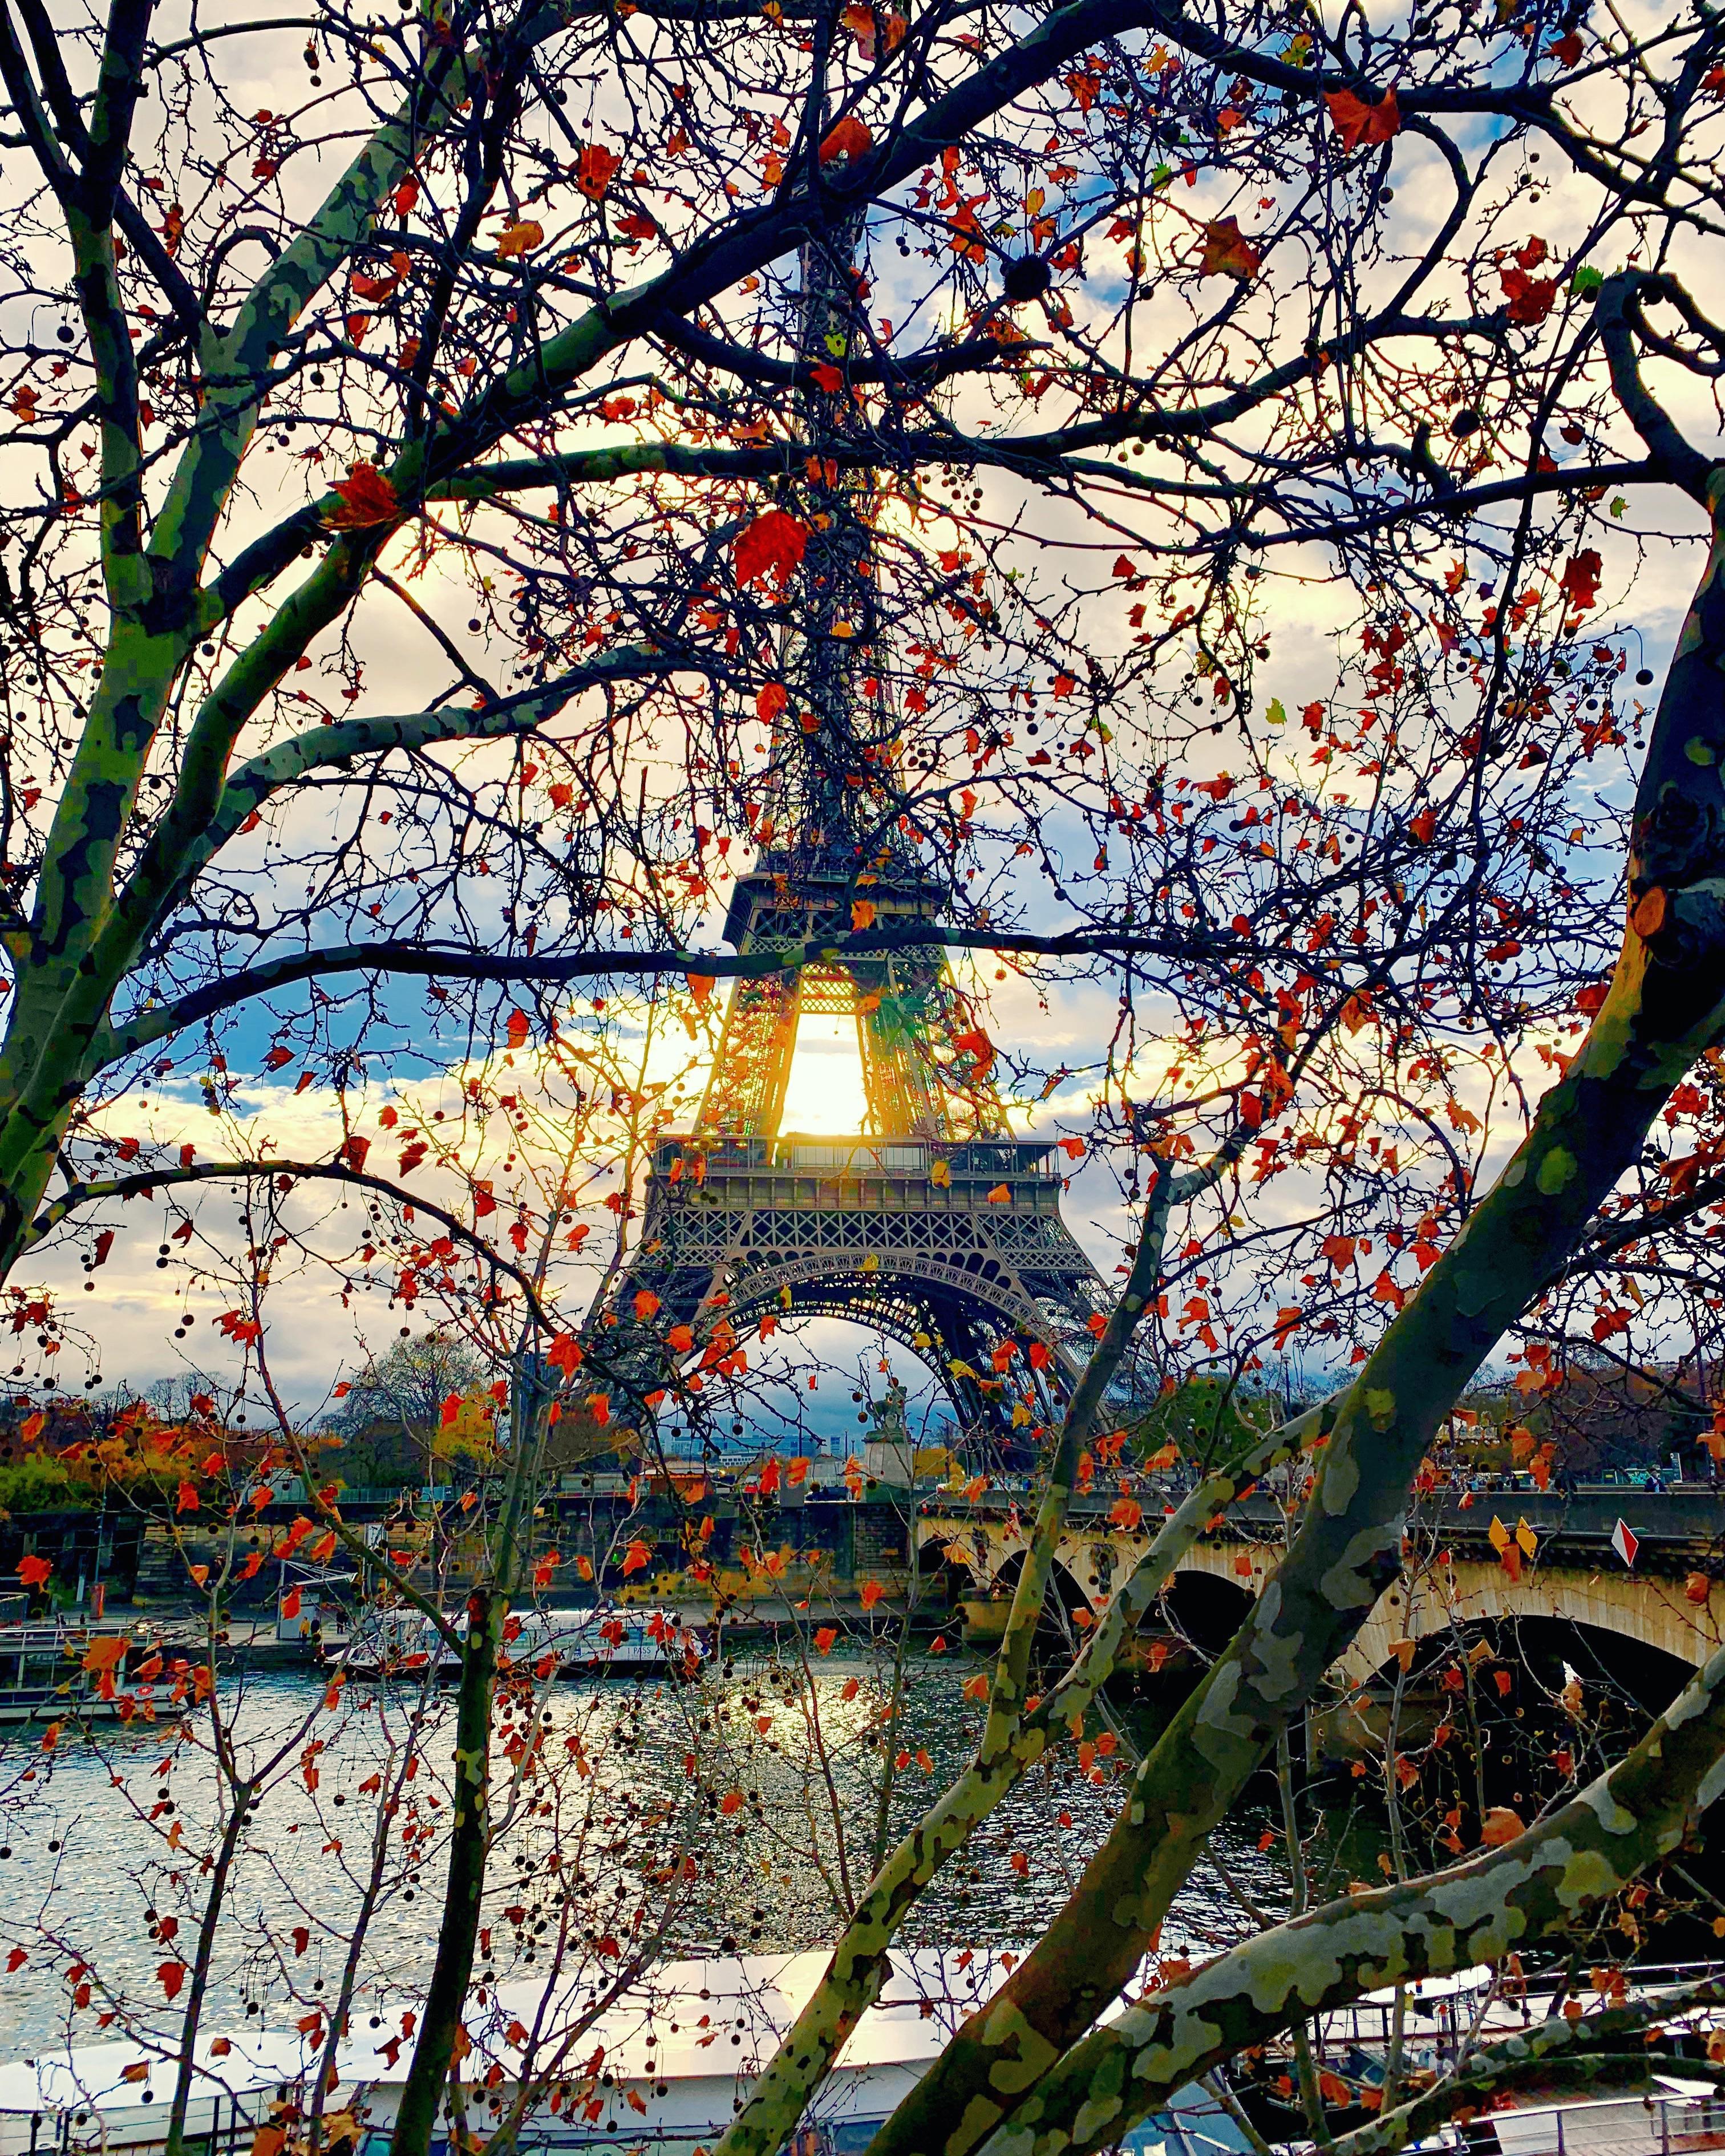 Sunrise + Autumn + iPhone XS Max + Snapseed + Paris = Wallpaper: iPhoneography